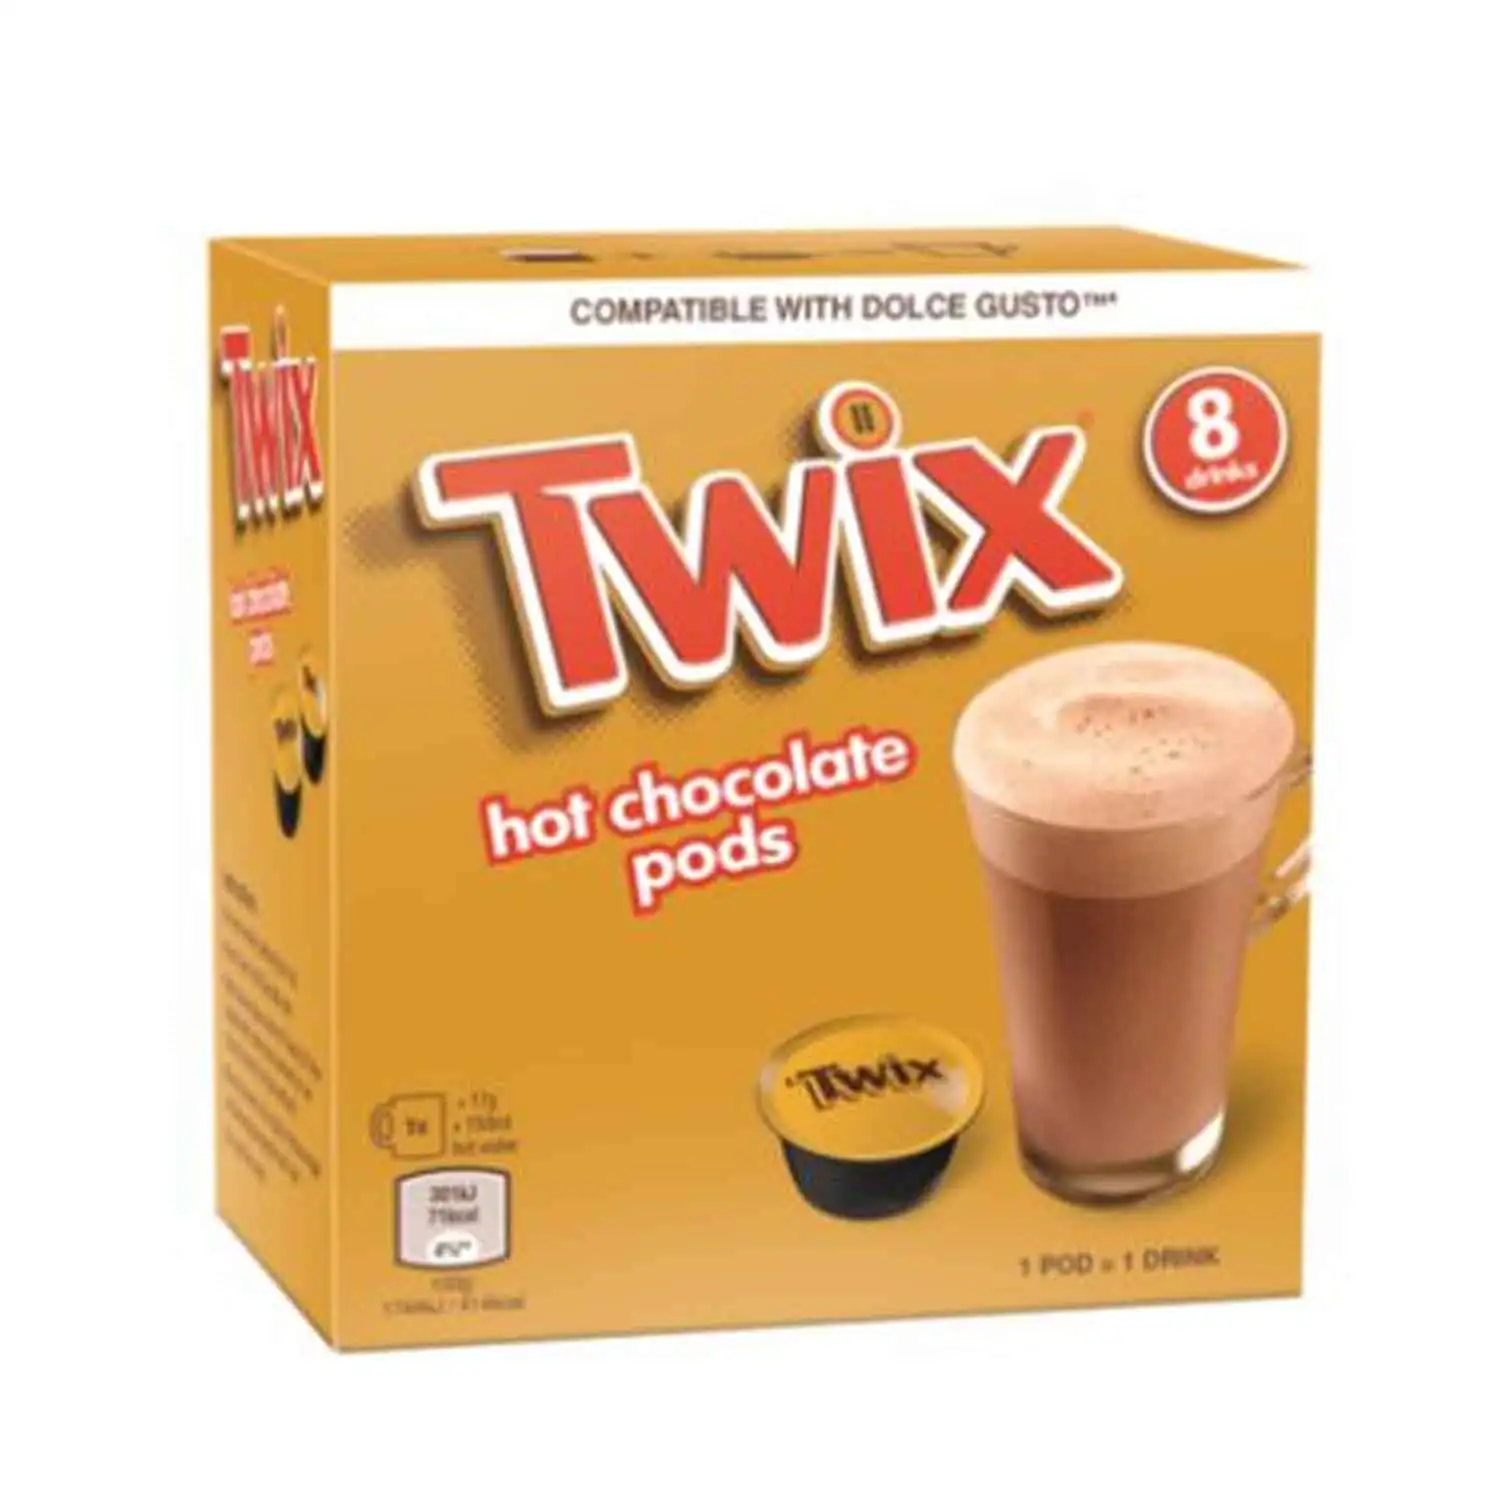 Twix hot chocolate pods 8x15g - Buy at Real Tobacco